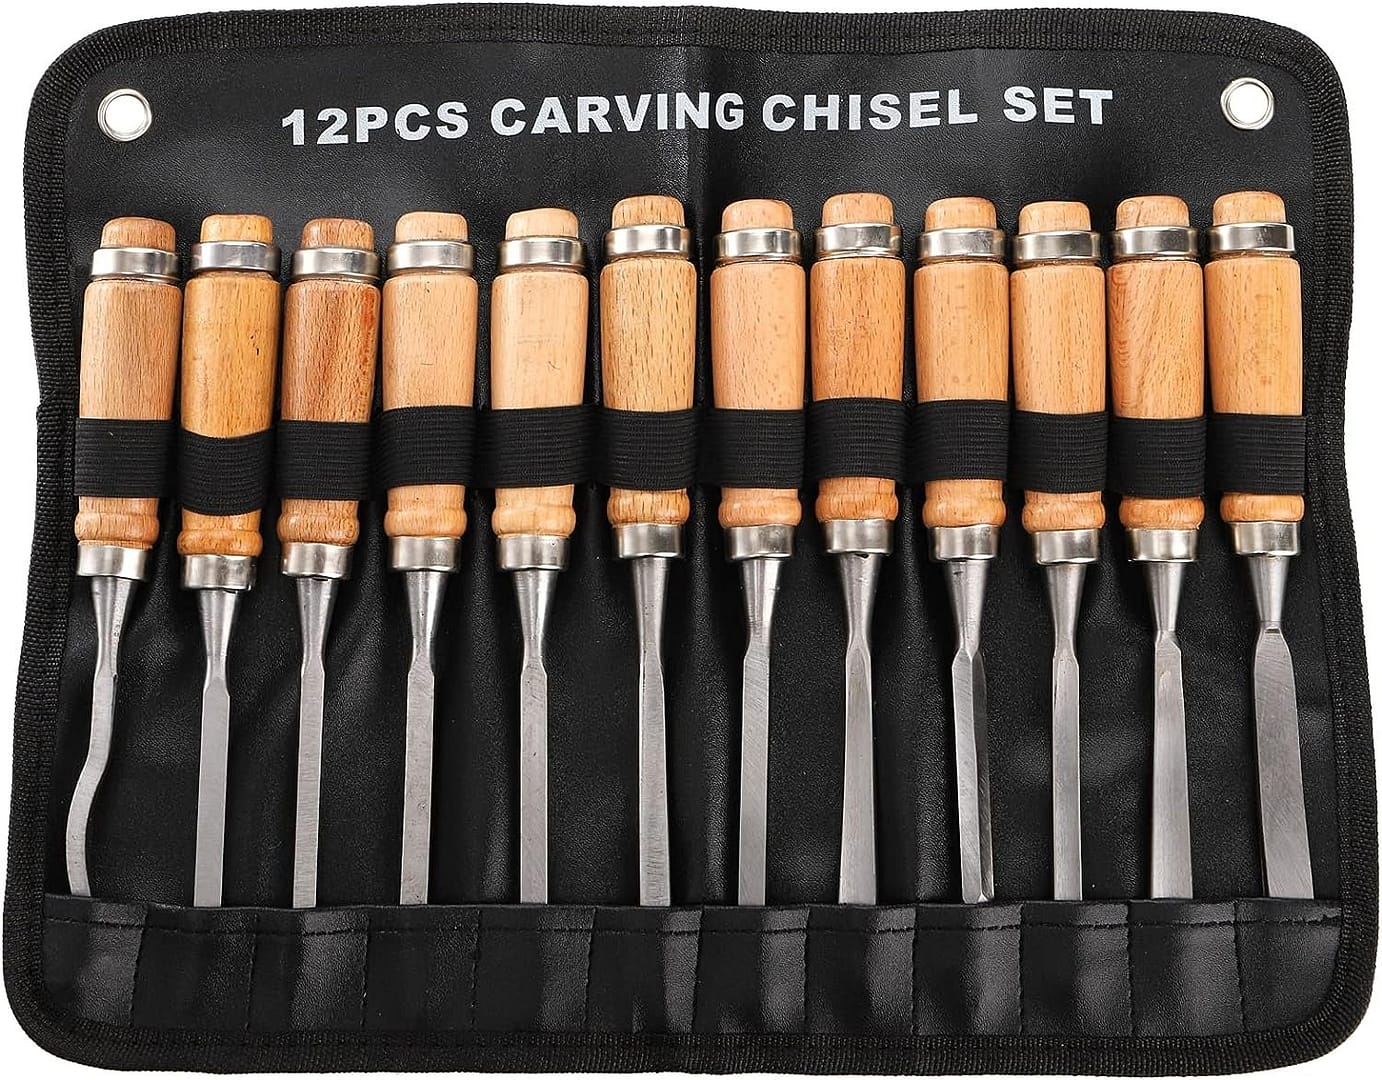 dicunoy 12 pcs wood carving tools gouges woodworking chisels full size wood carving knifes for beginner hobbyists profes 2